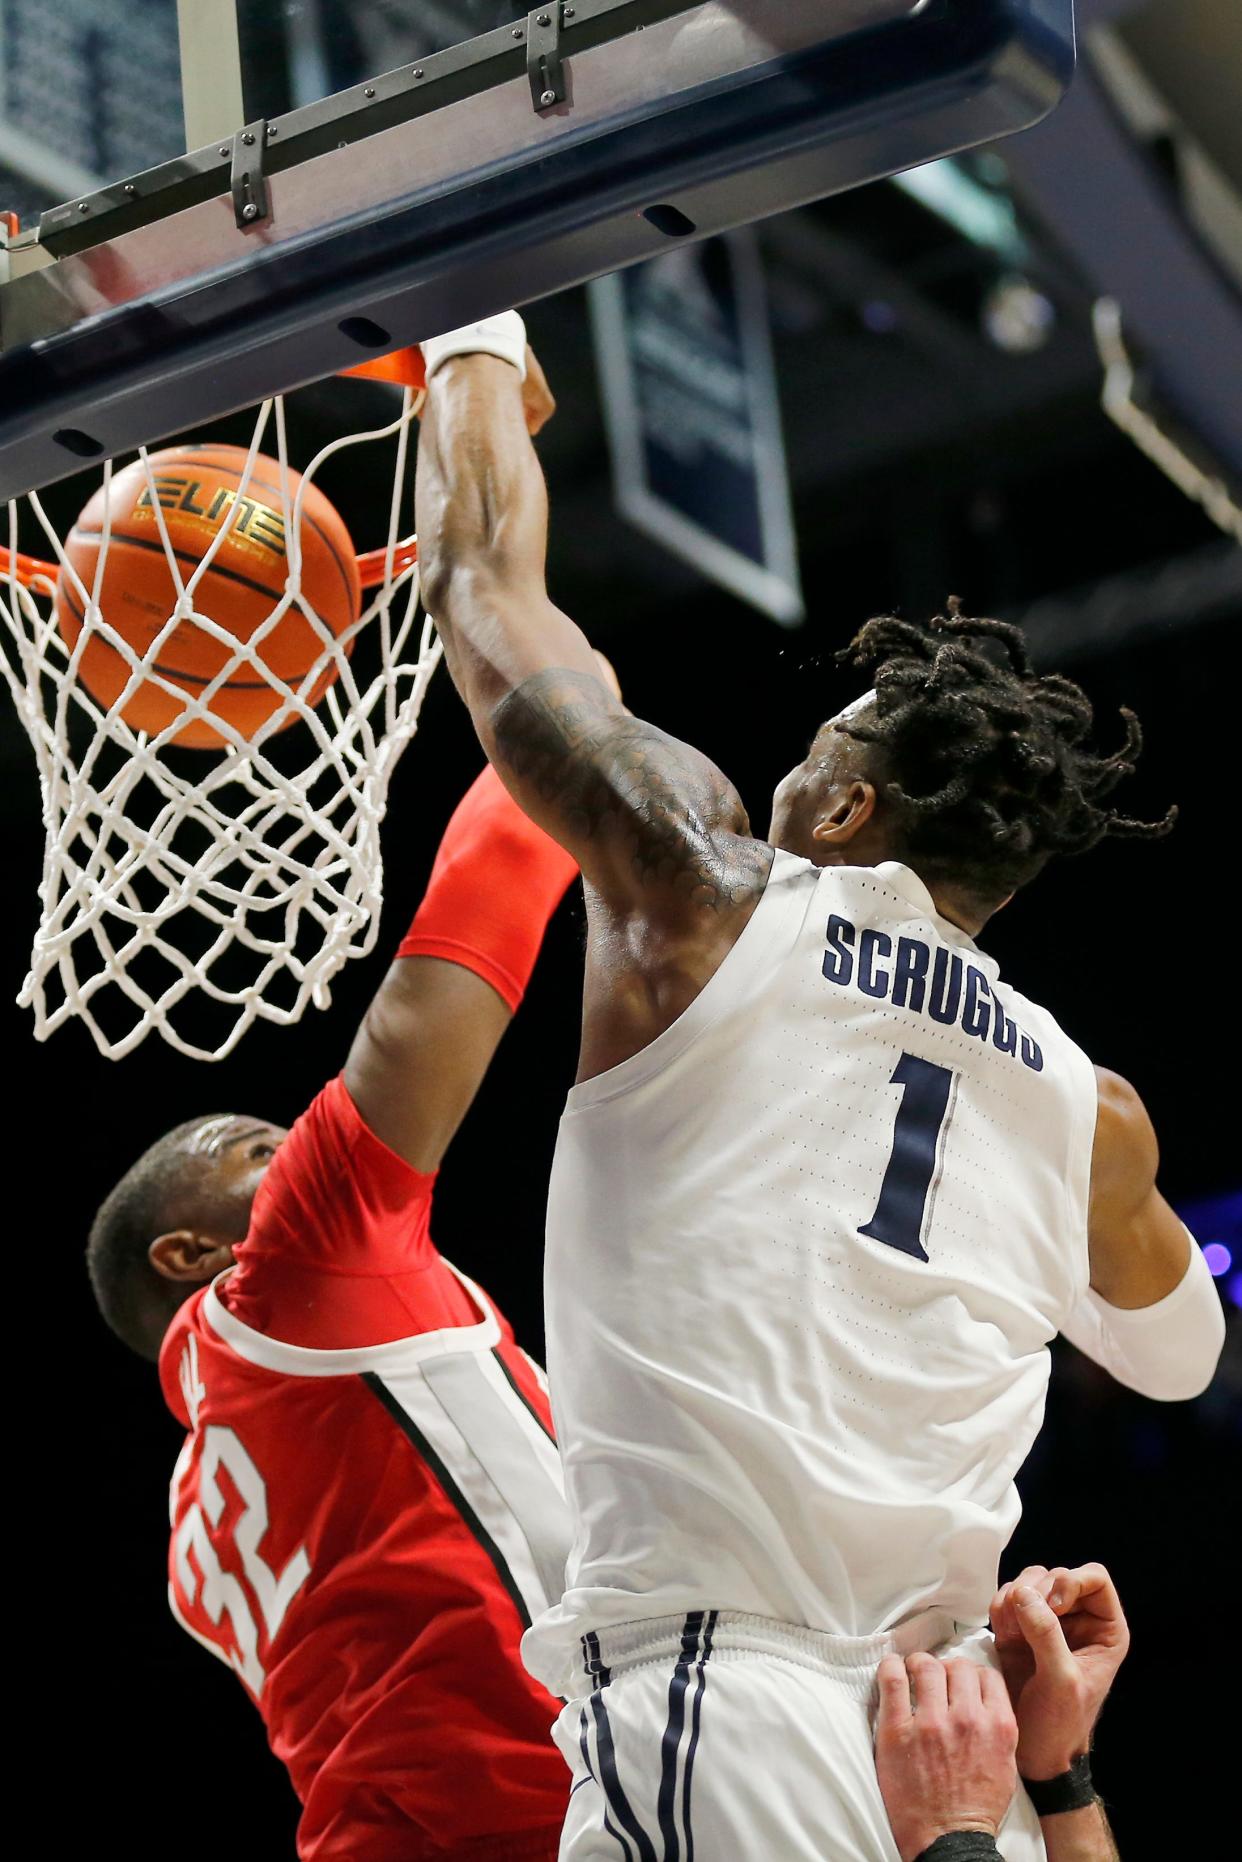 Xavier Musketeers guard Paul Scruggs (1) drives and dunks over Ohio State Buckeyes forward E.J. Liddell (32) in the second half of the NCAA basketball game between the Xavier Musketeers and the Ohio State Buckeyes at the Cintas Center in Cincinnati on Thursday, Nov. 18, 2021. Xavier defeated the 19-ranked Buckeyes, 71-65.